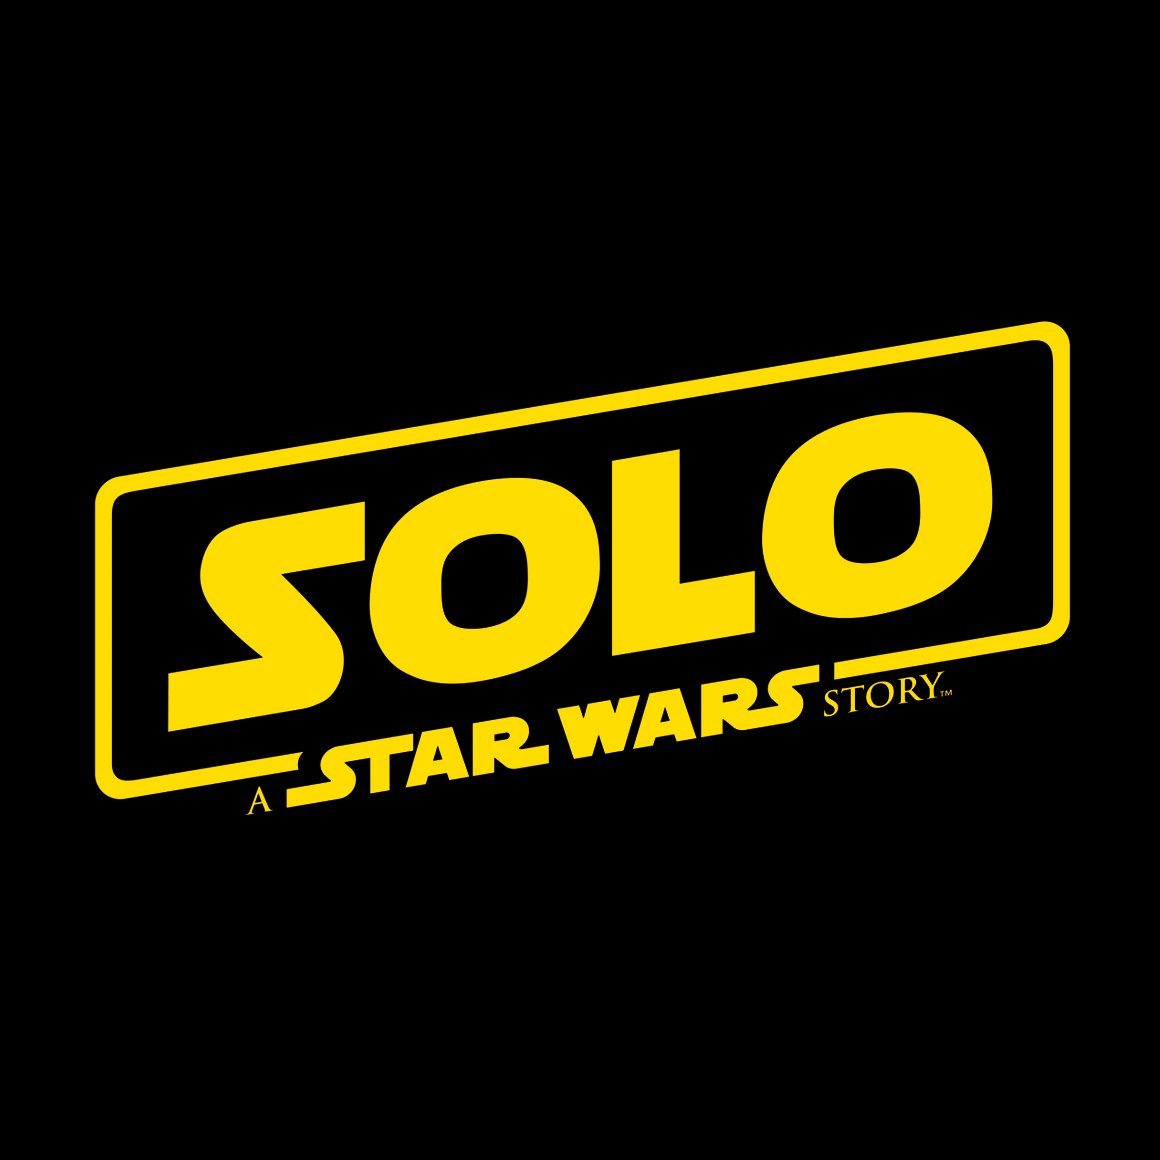 Countdown for #Solo: A #StarWars Story, scheduled for May 25, 2018.